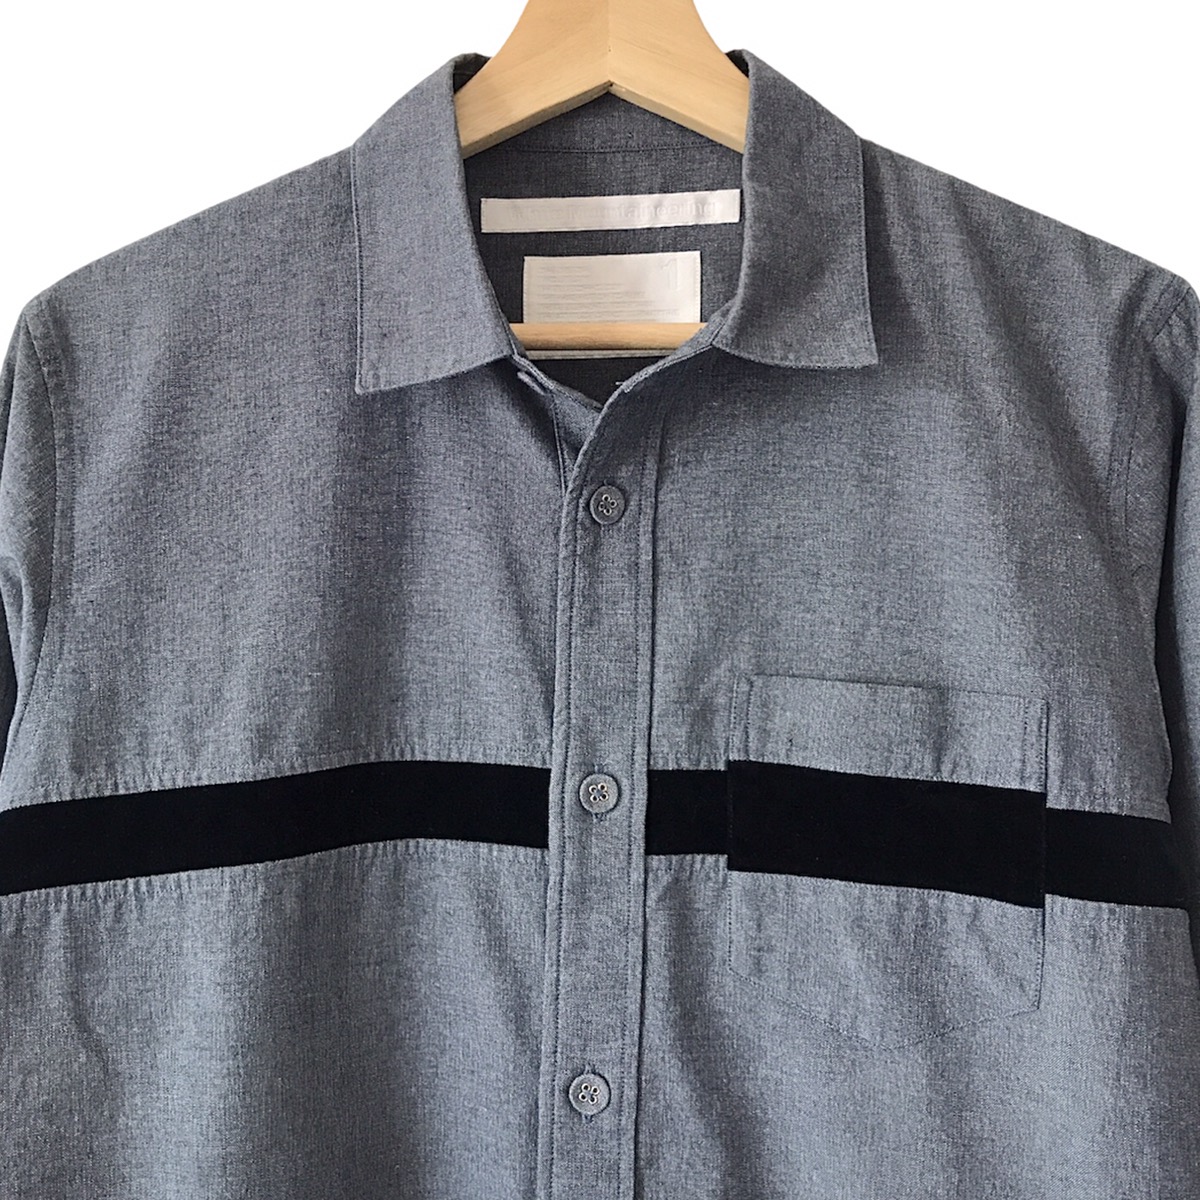 Authentic White Mountaineering Japan Chambray Suede Shirt - 3